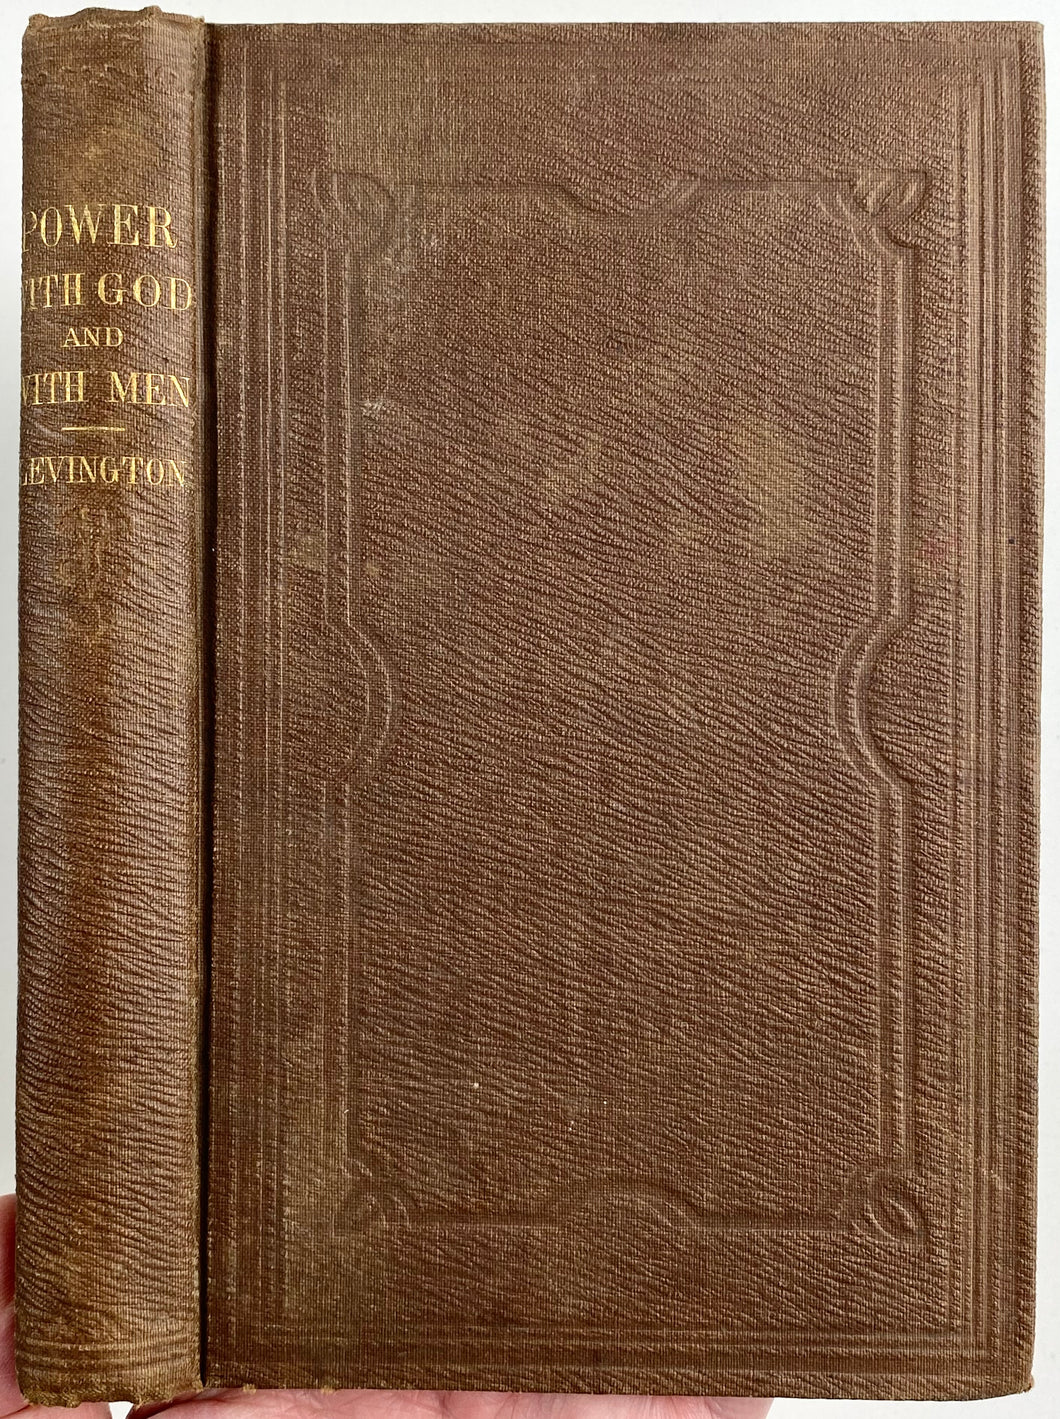 1868 RARE METHODIST. Power With God the Result of Christian Godliness. Scarce!